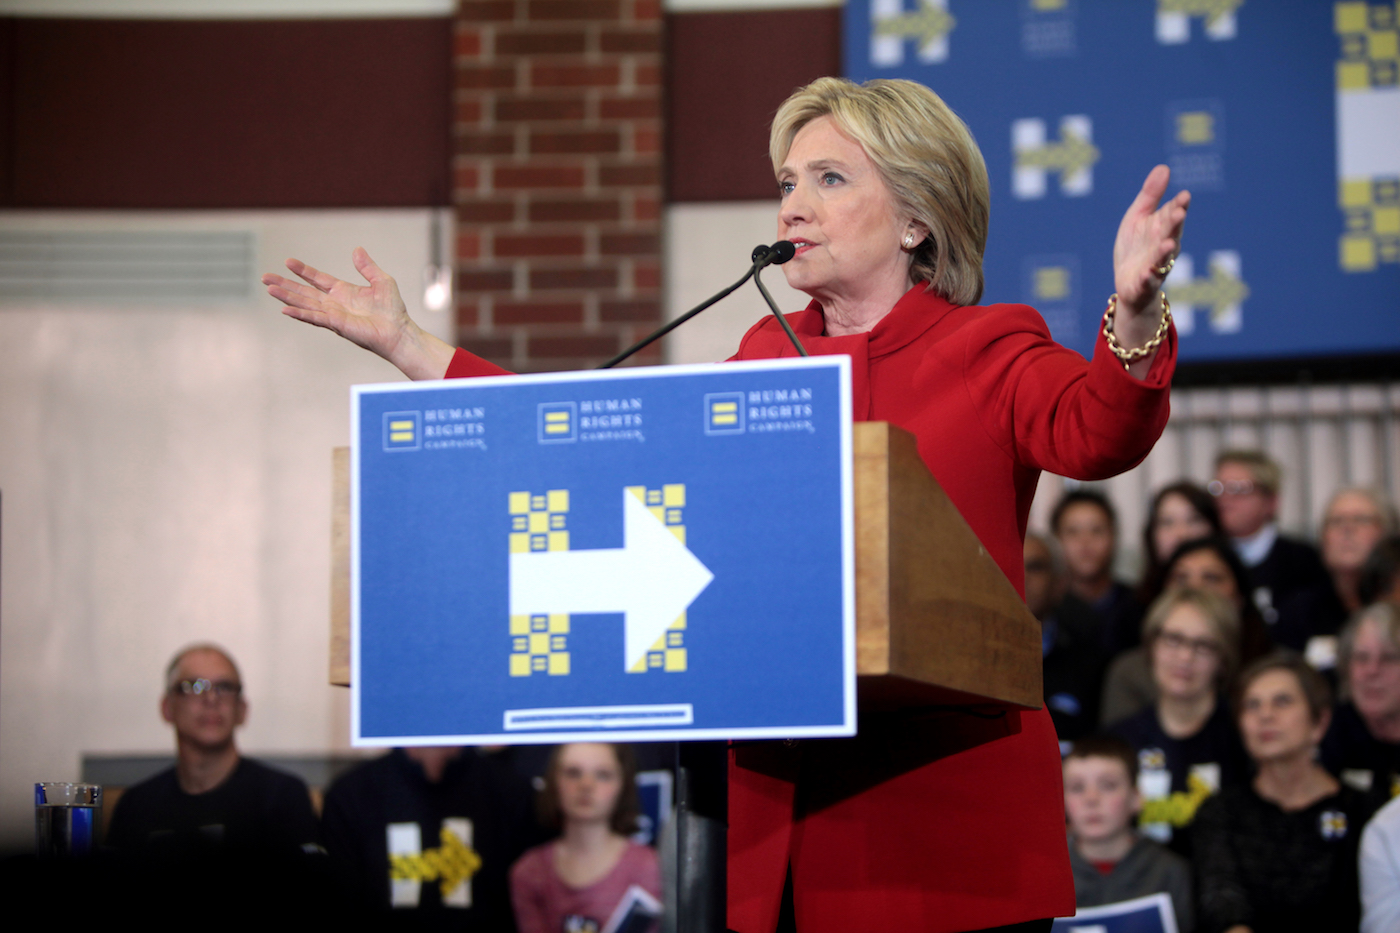 Hillary Clinton speaking in West Des Moines, Iowa, on January 24, 2016 (photo by Gage Skidmore/Flickr)